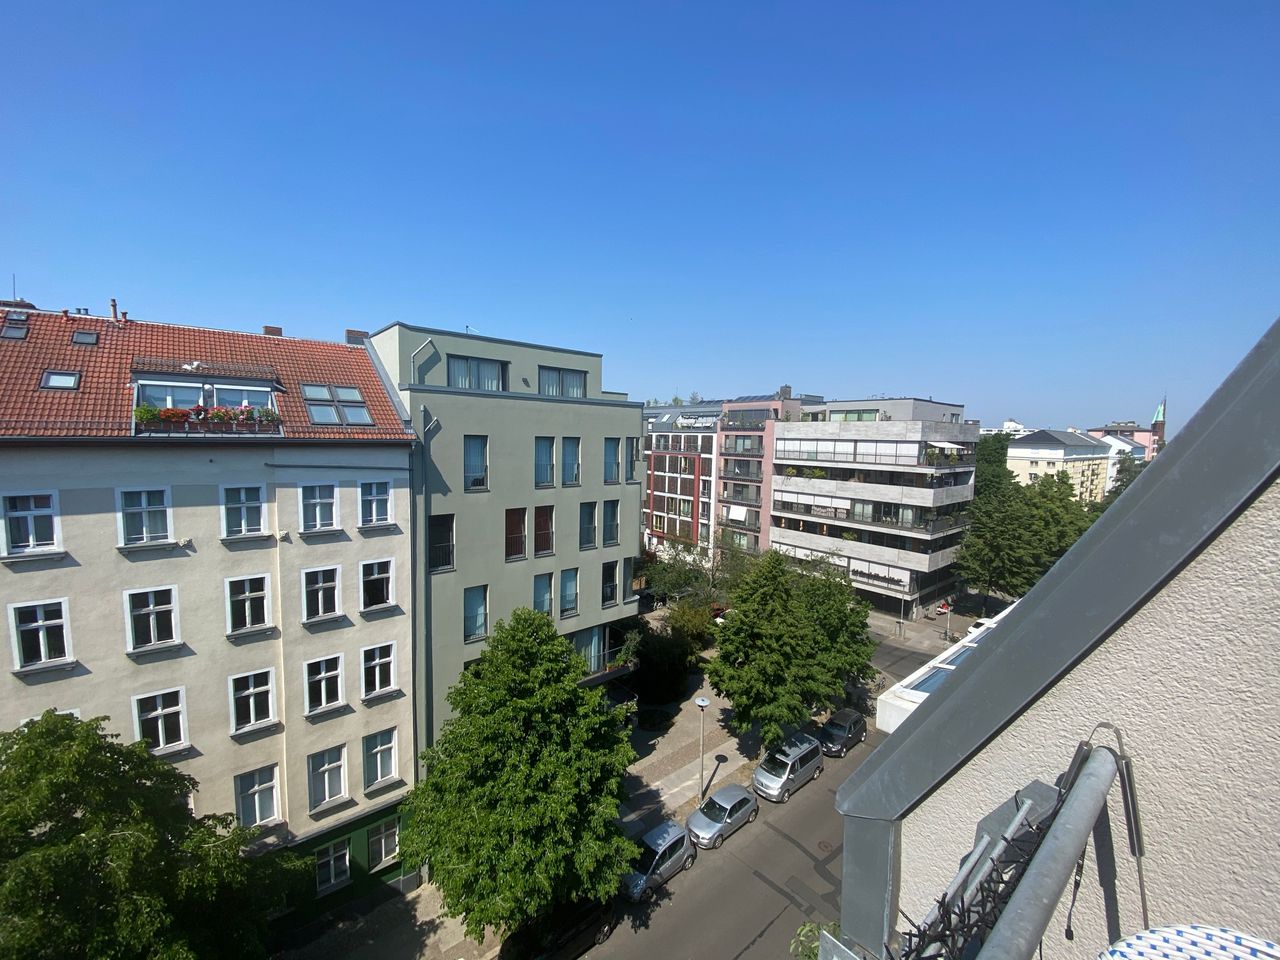 Parking free / 3 room top floor apartment in Berlin-Mitte, incl. underground car park with elevator to the top floor, terrace, WiFi,